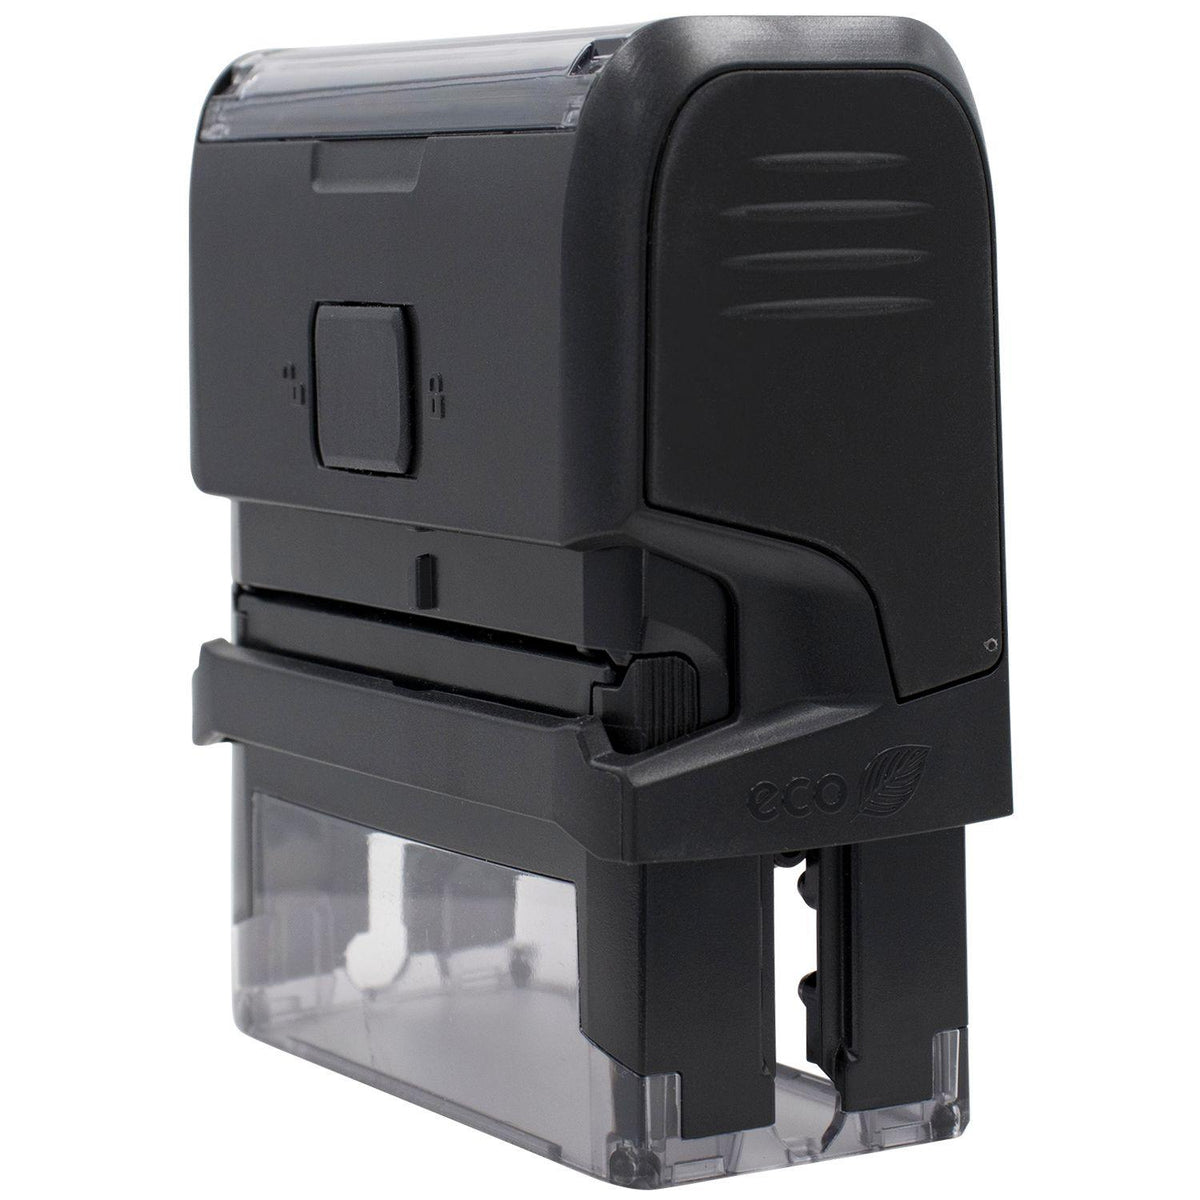 Self-Inking Dining Room Closed Stamp - Engineer Seal Stamps - Brand_Trodat, Impression Size_Small, Stamp Type_Self-Inking Stamp, Type of Use_Business